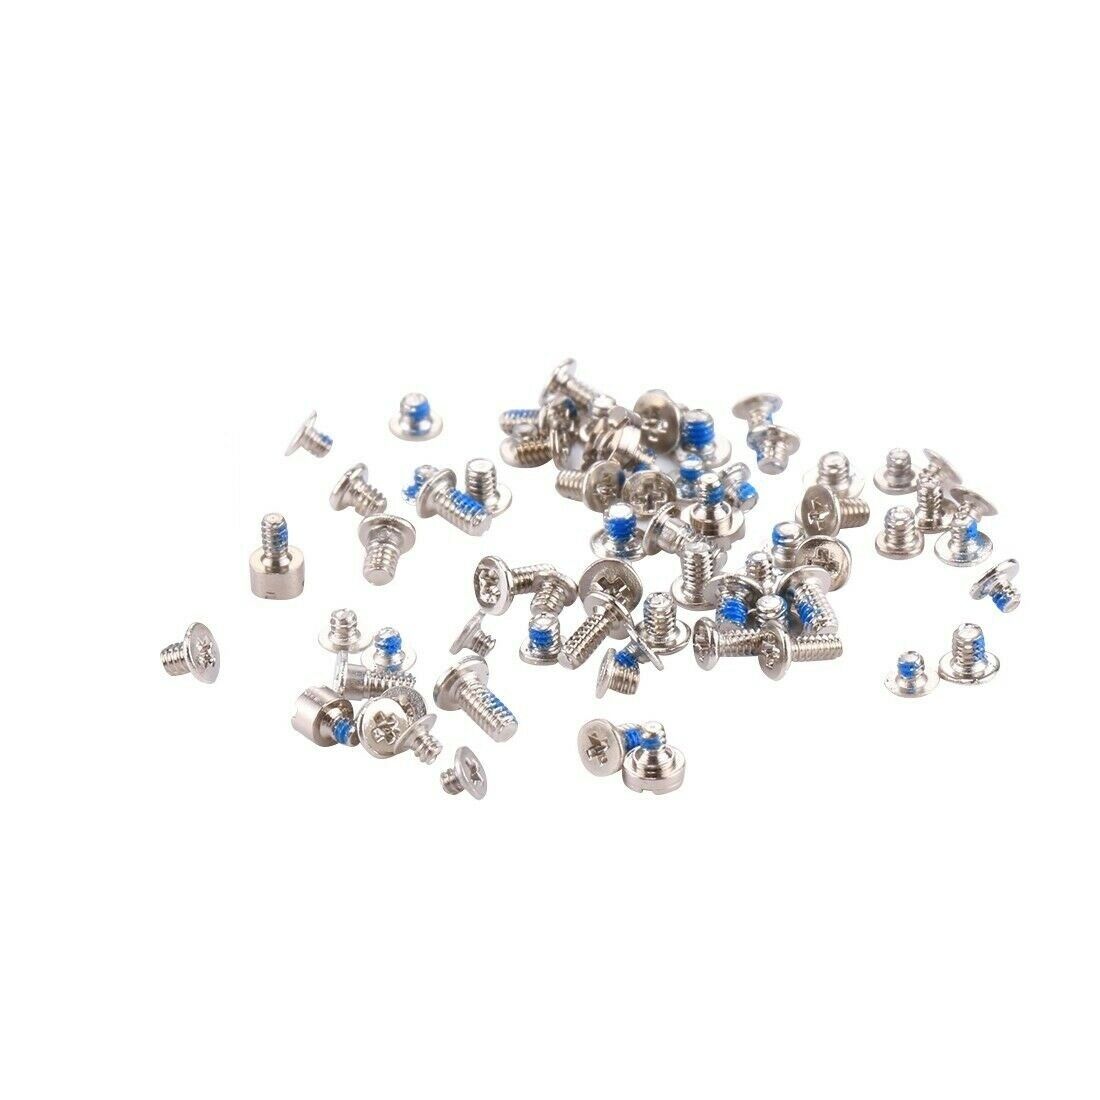 Apple iPhone 7 Full Complete Screw Set including the 2 Gold Bottom Screws for [product_price] - First Help Tech